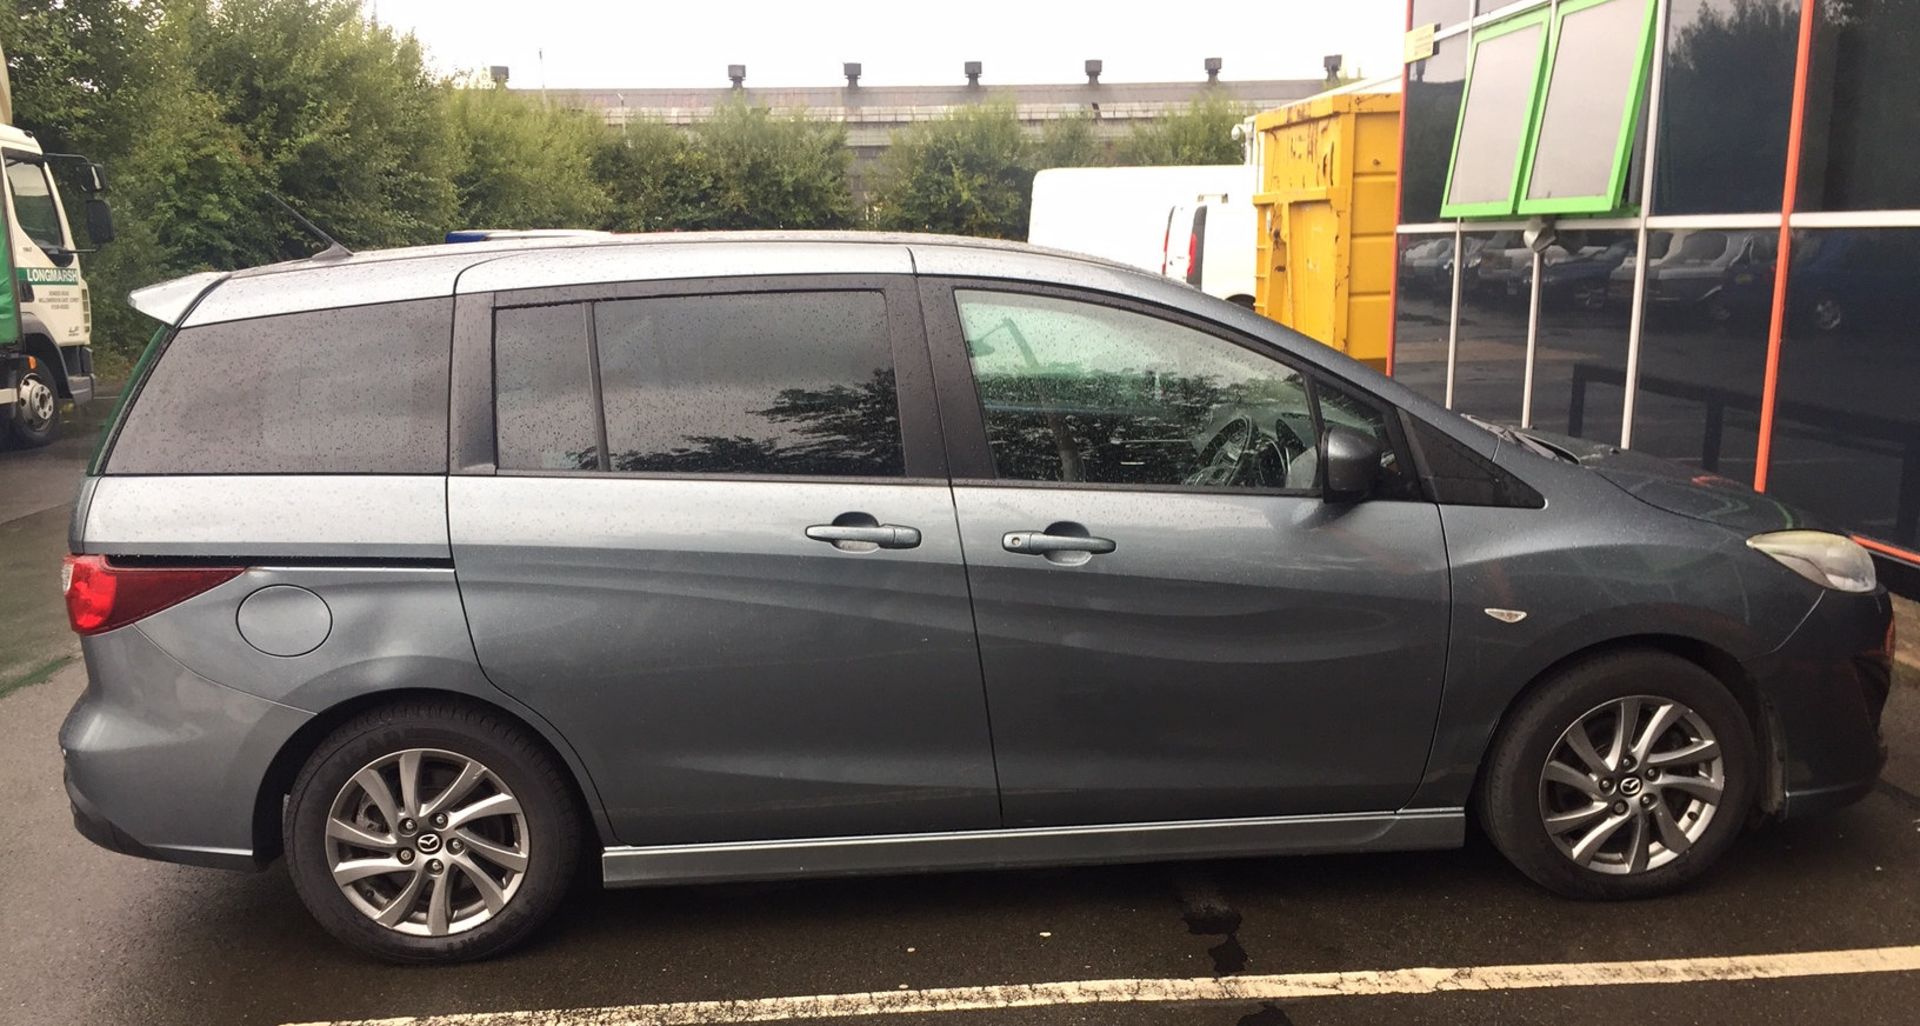 2013 Mazda 5 2.0 Venture Edition 5 Dr MPV - CL505 - NO VAT ON THE HAMMER - Location: Corby, N - Image 11 of 18